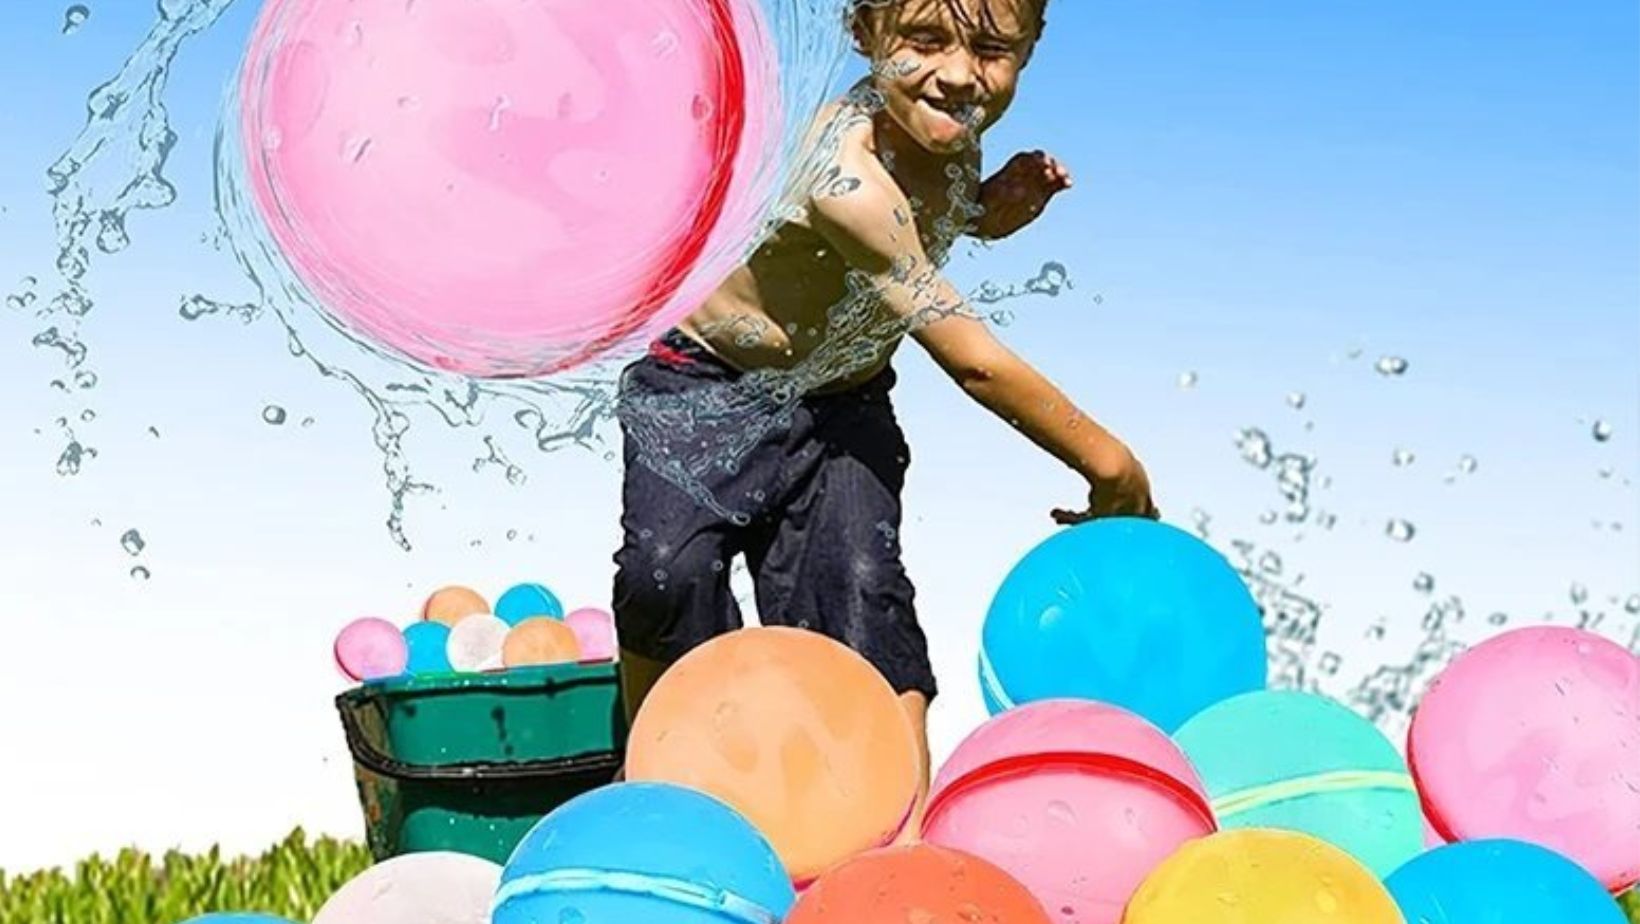 Step Wise Guide to Effectively Clean Reusable Water Balloons